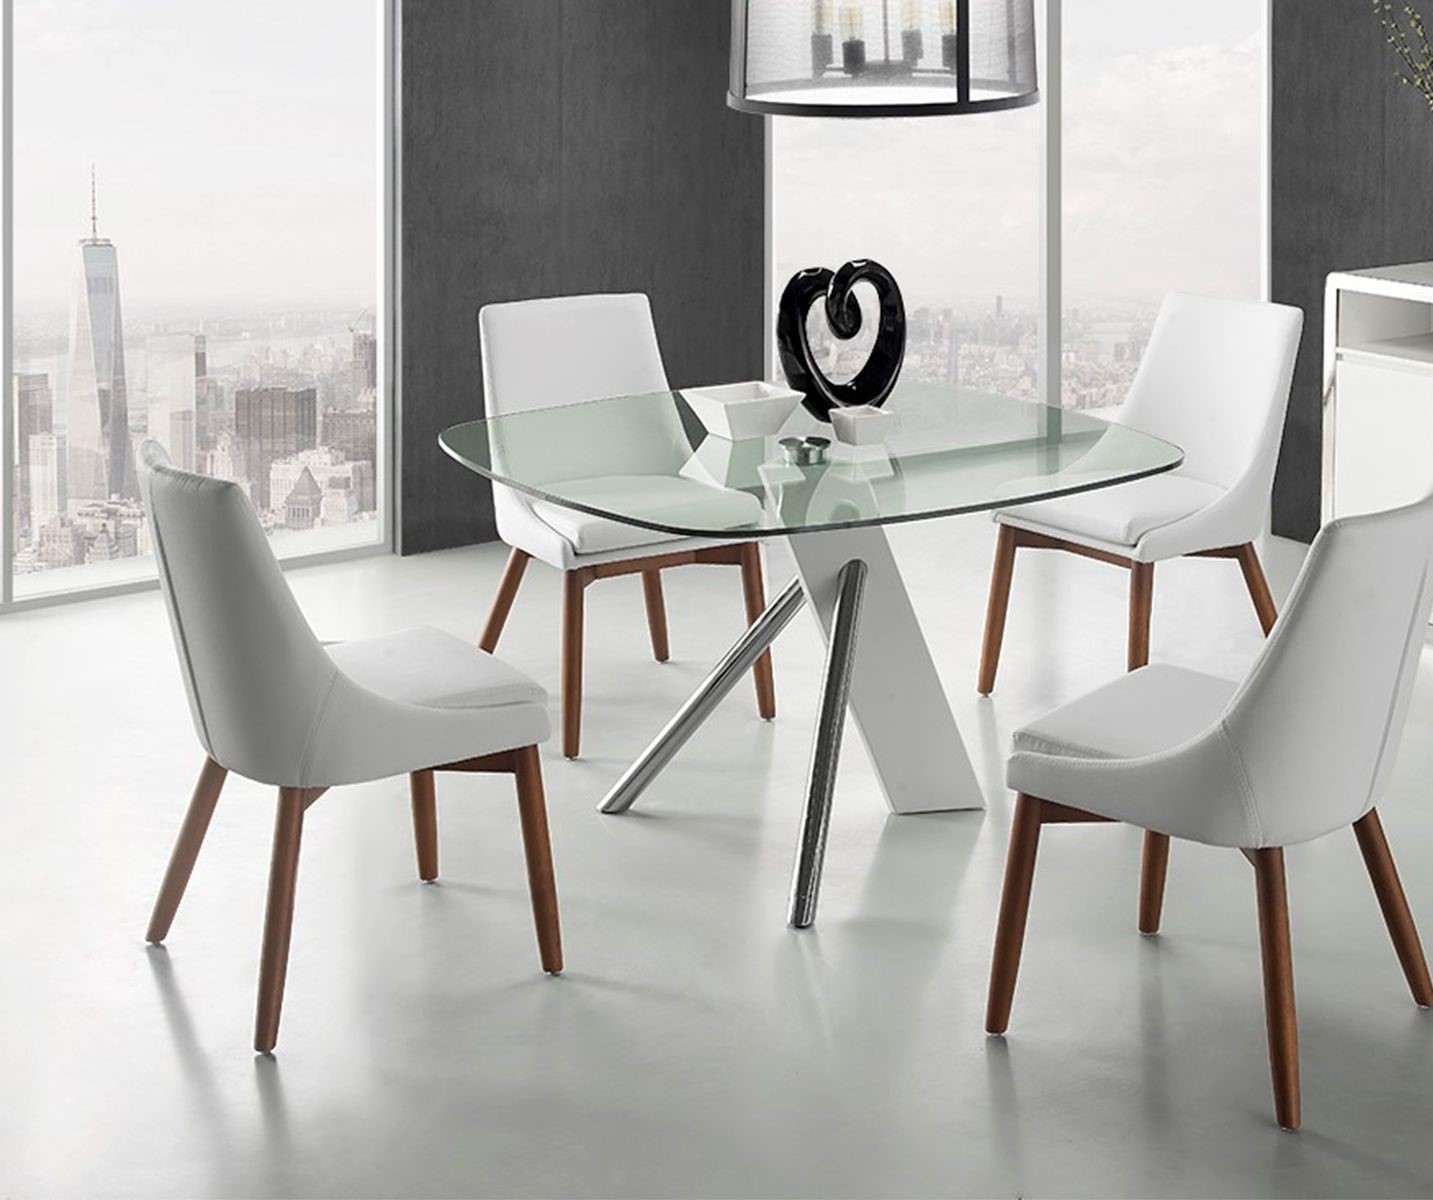 Creatice High Gloss Dining Room Furniture for Living room